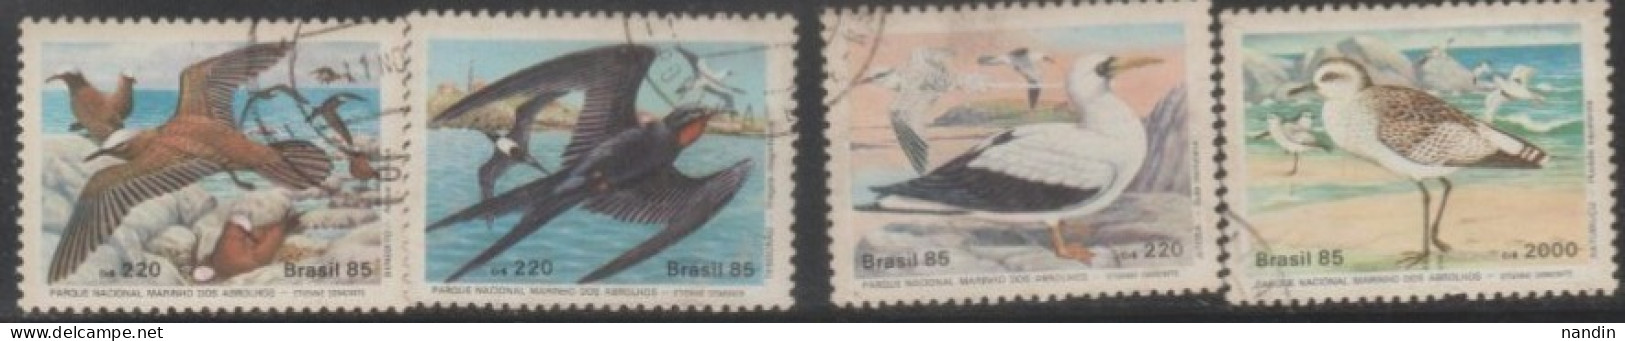 1985 BRAZIL USED STAMPS ON BIRD/ BIRDS FOUND IN NATIONAL MARINE PARK,ABROLHOS - Marine Web-footed Birds